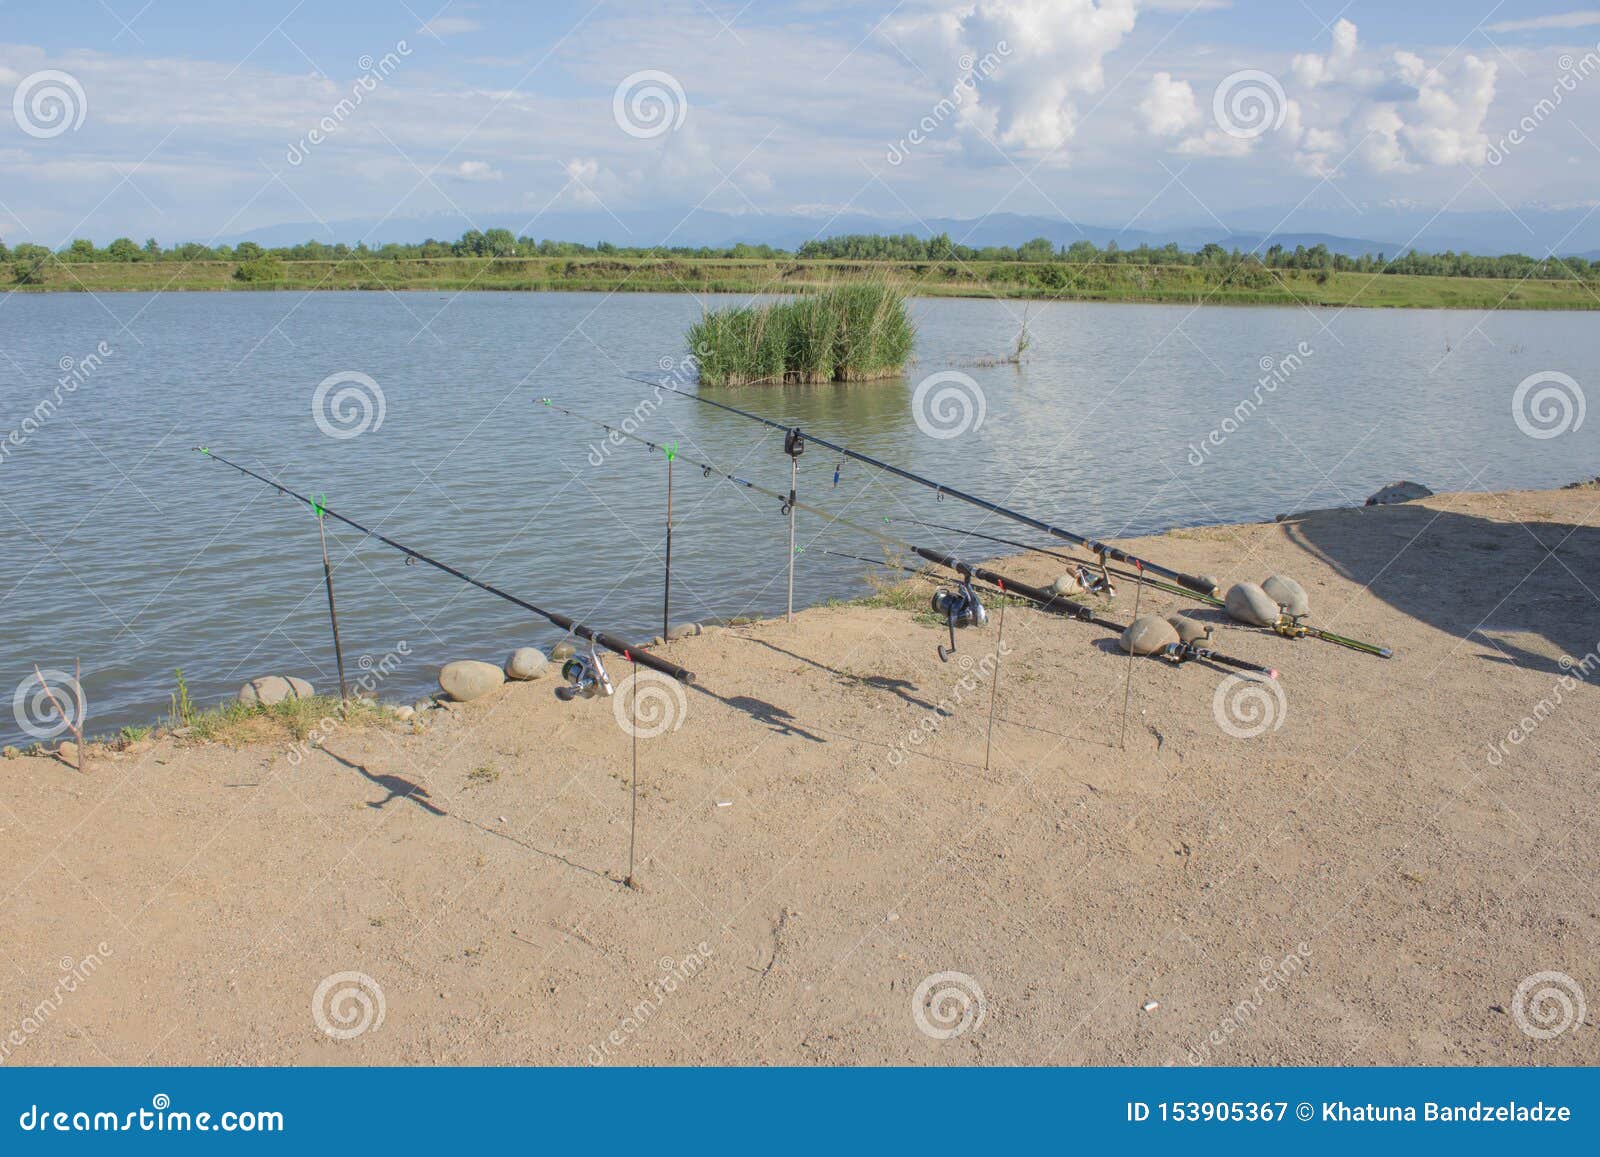 https://thumbs.dreamstime.com/z/fishing-poles-mounted-holder-set-up-shore-lake-launched-rod-waiting-153905367.jpg